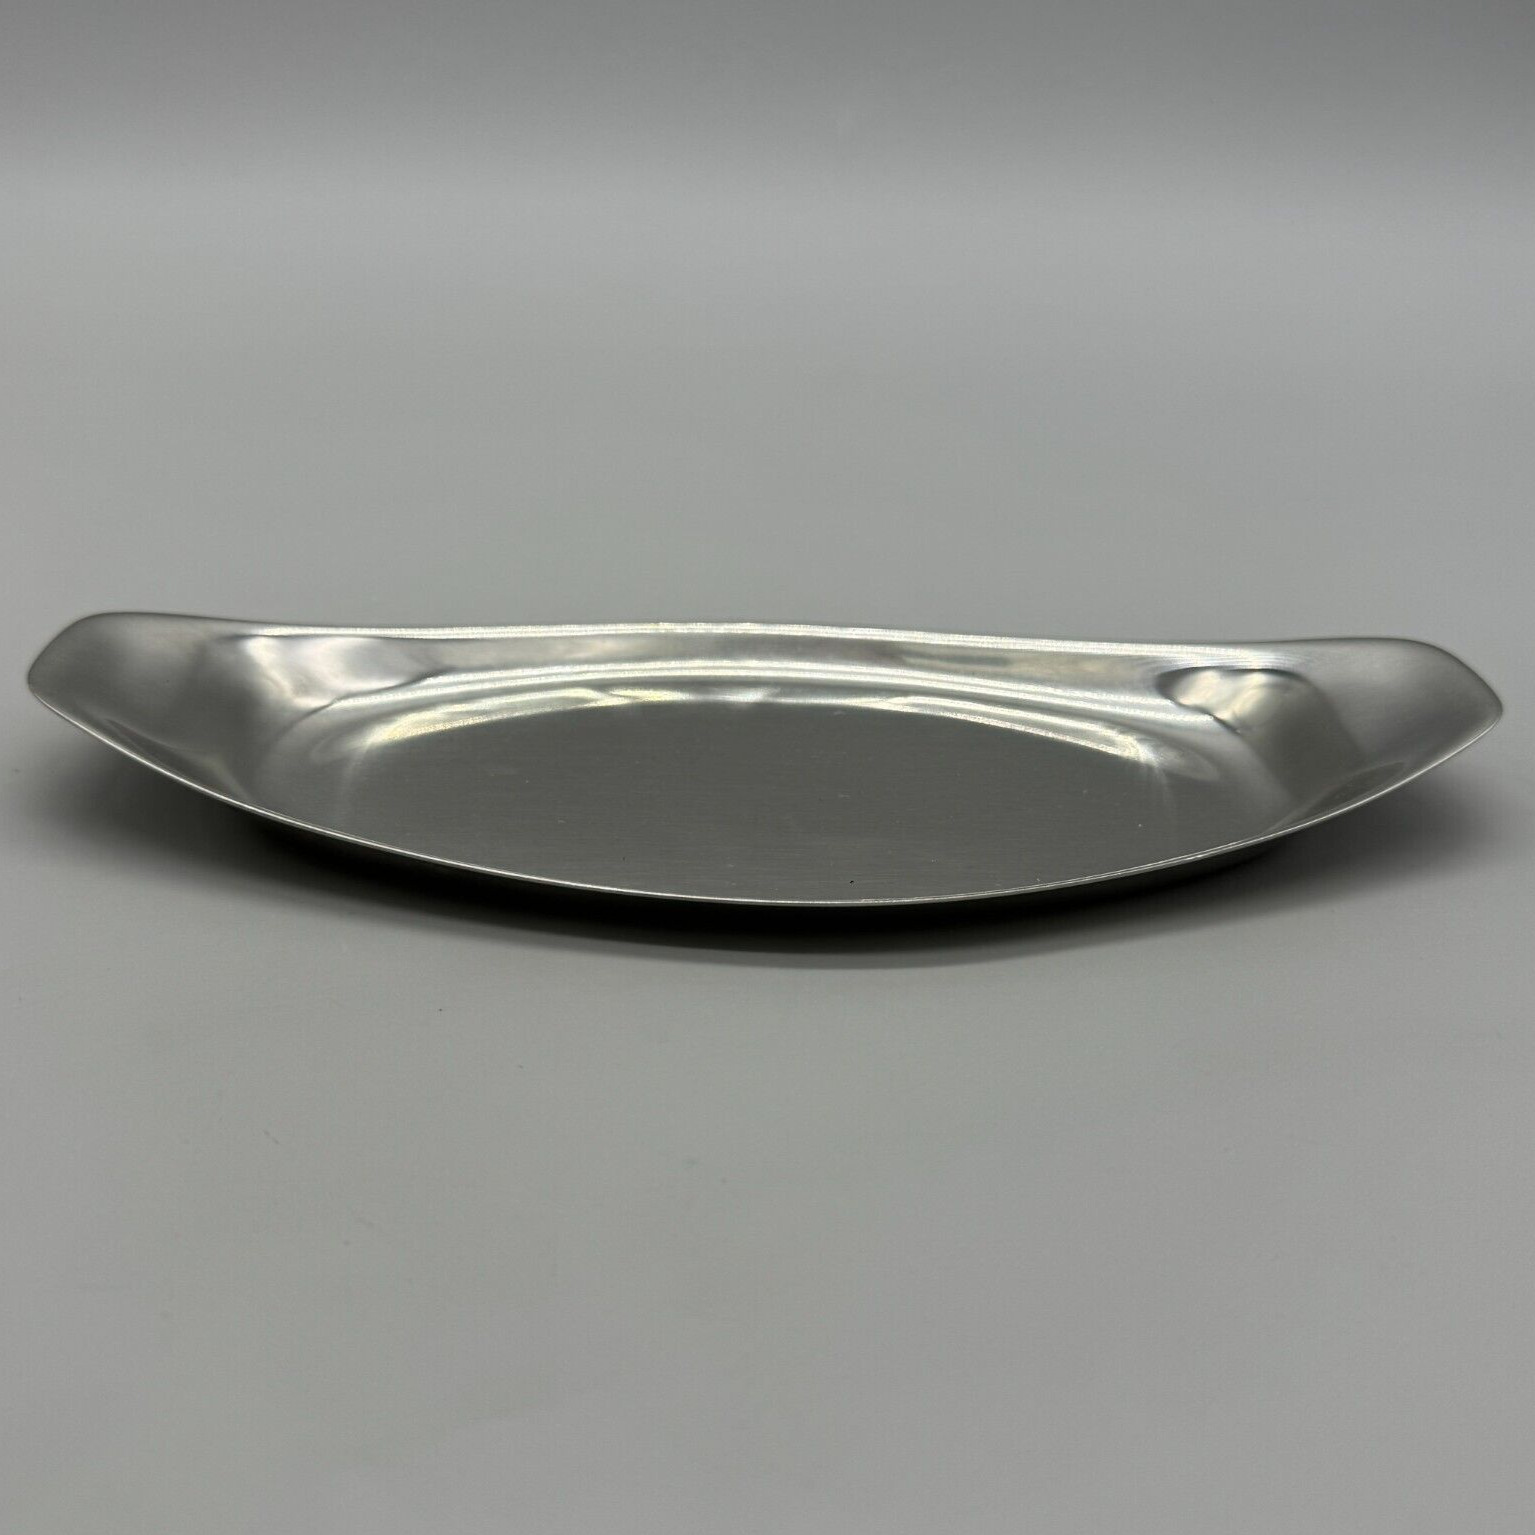 WMF Cromargan Germany Vtg Oval Serving Tray Dish Stainless 9